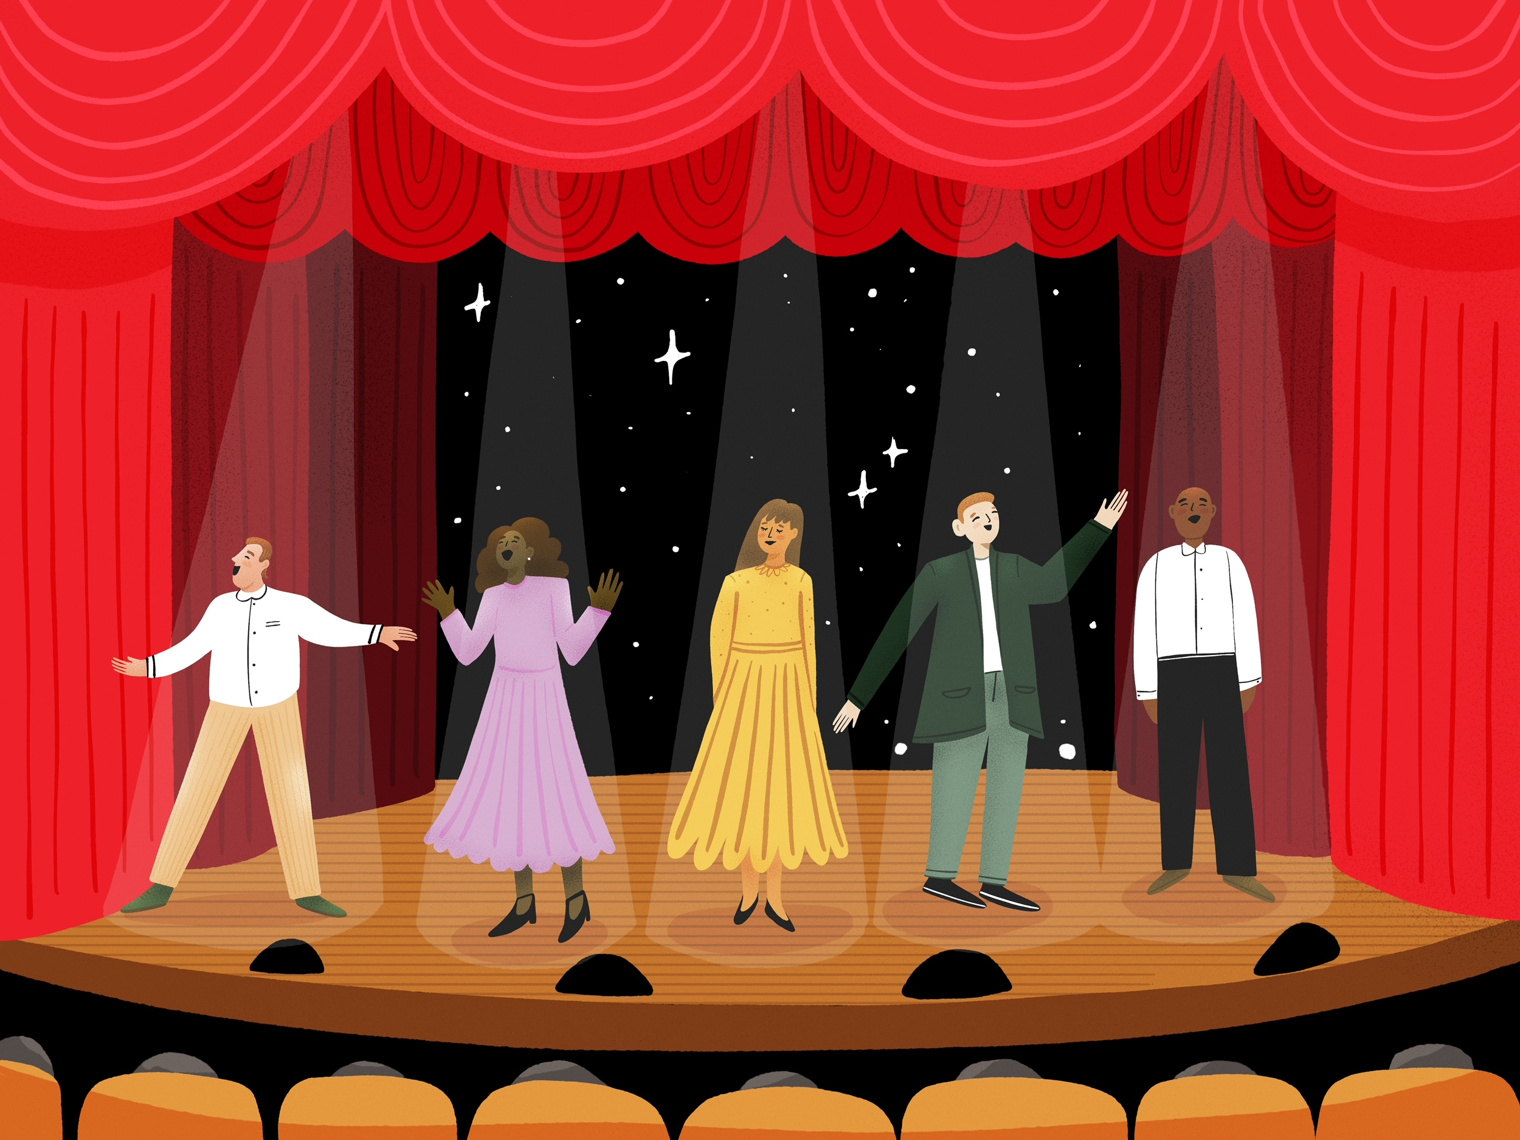 Illustration of Broadway stage with actors and actresses on stage.